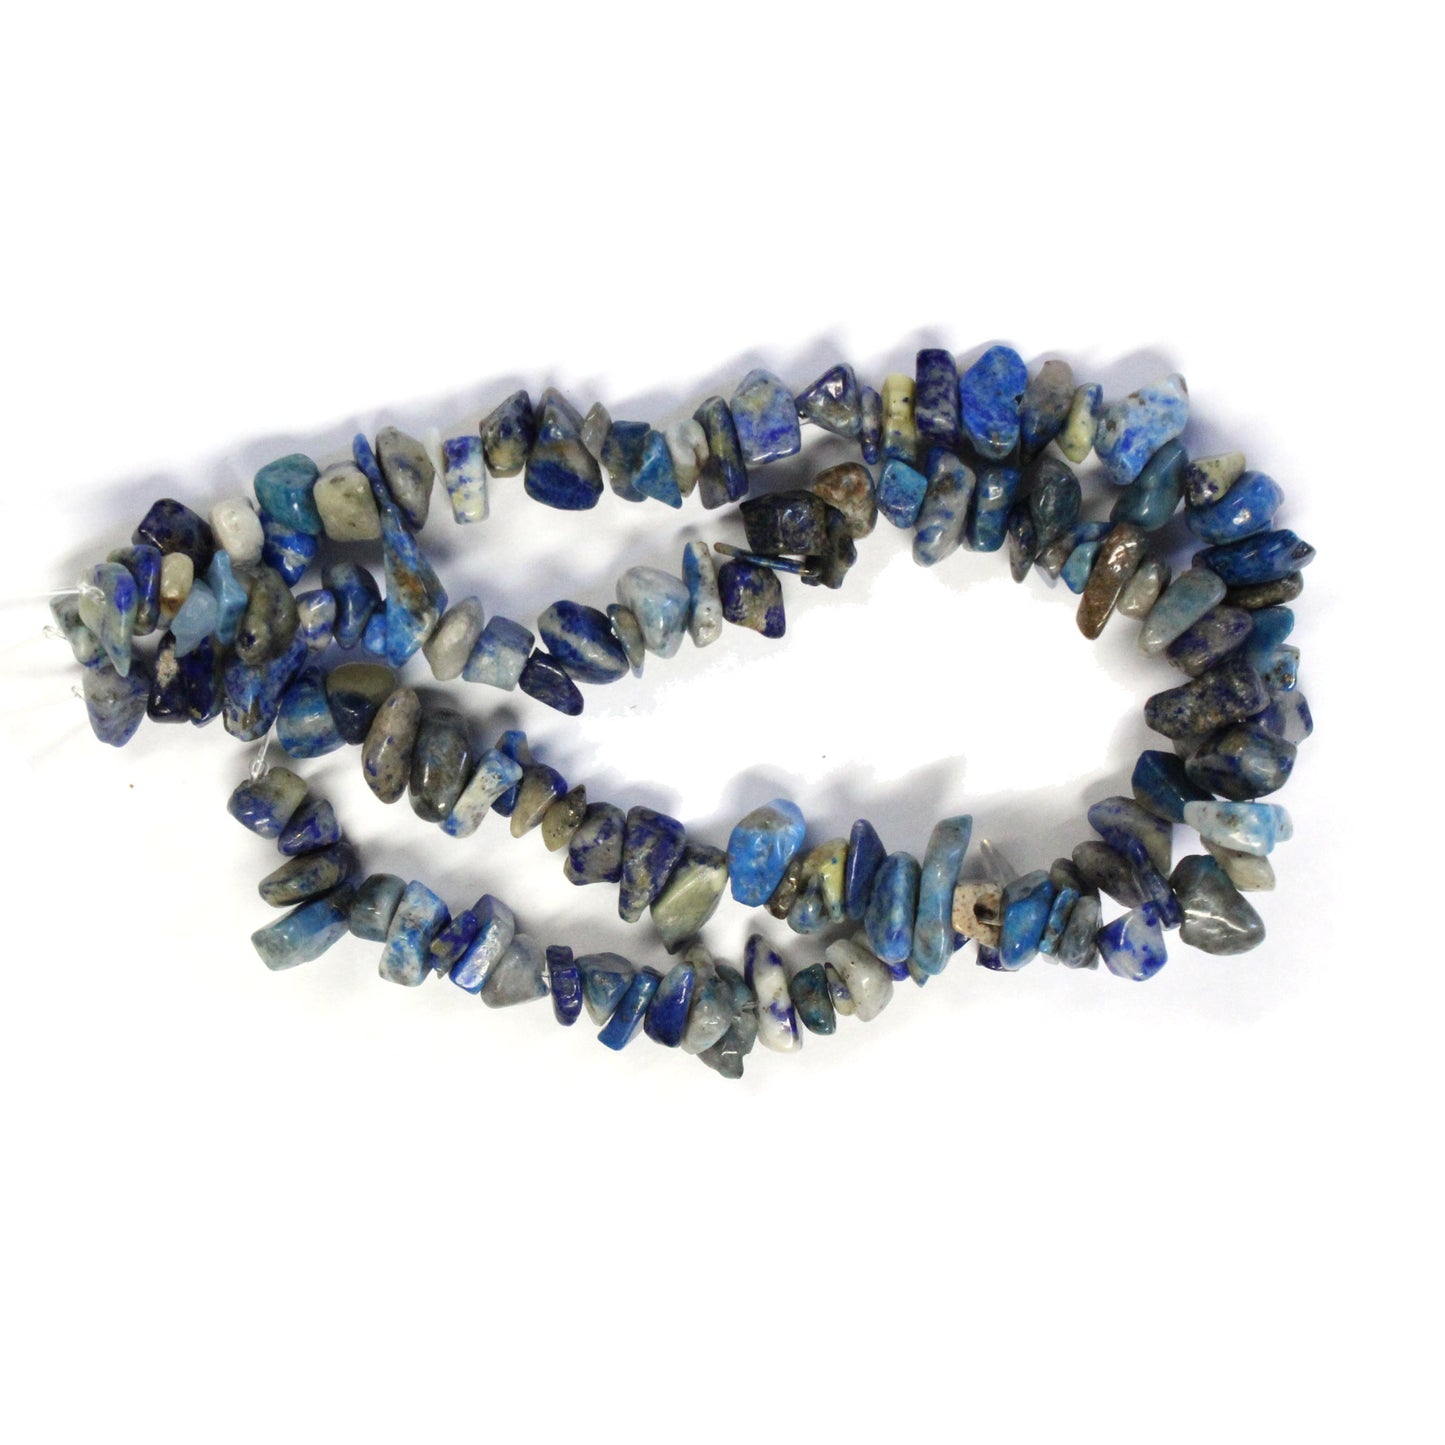 Blue Lapis Chip Beads / 16 Inch strand / 6-12 chips / natural color mix opaque stone